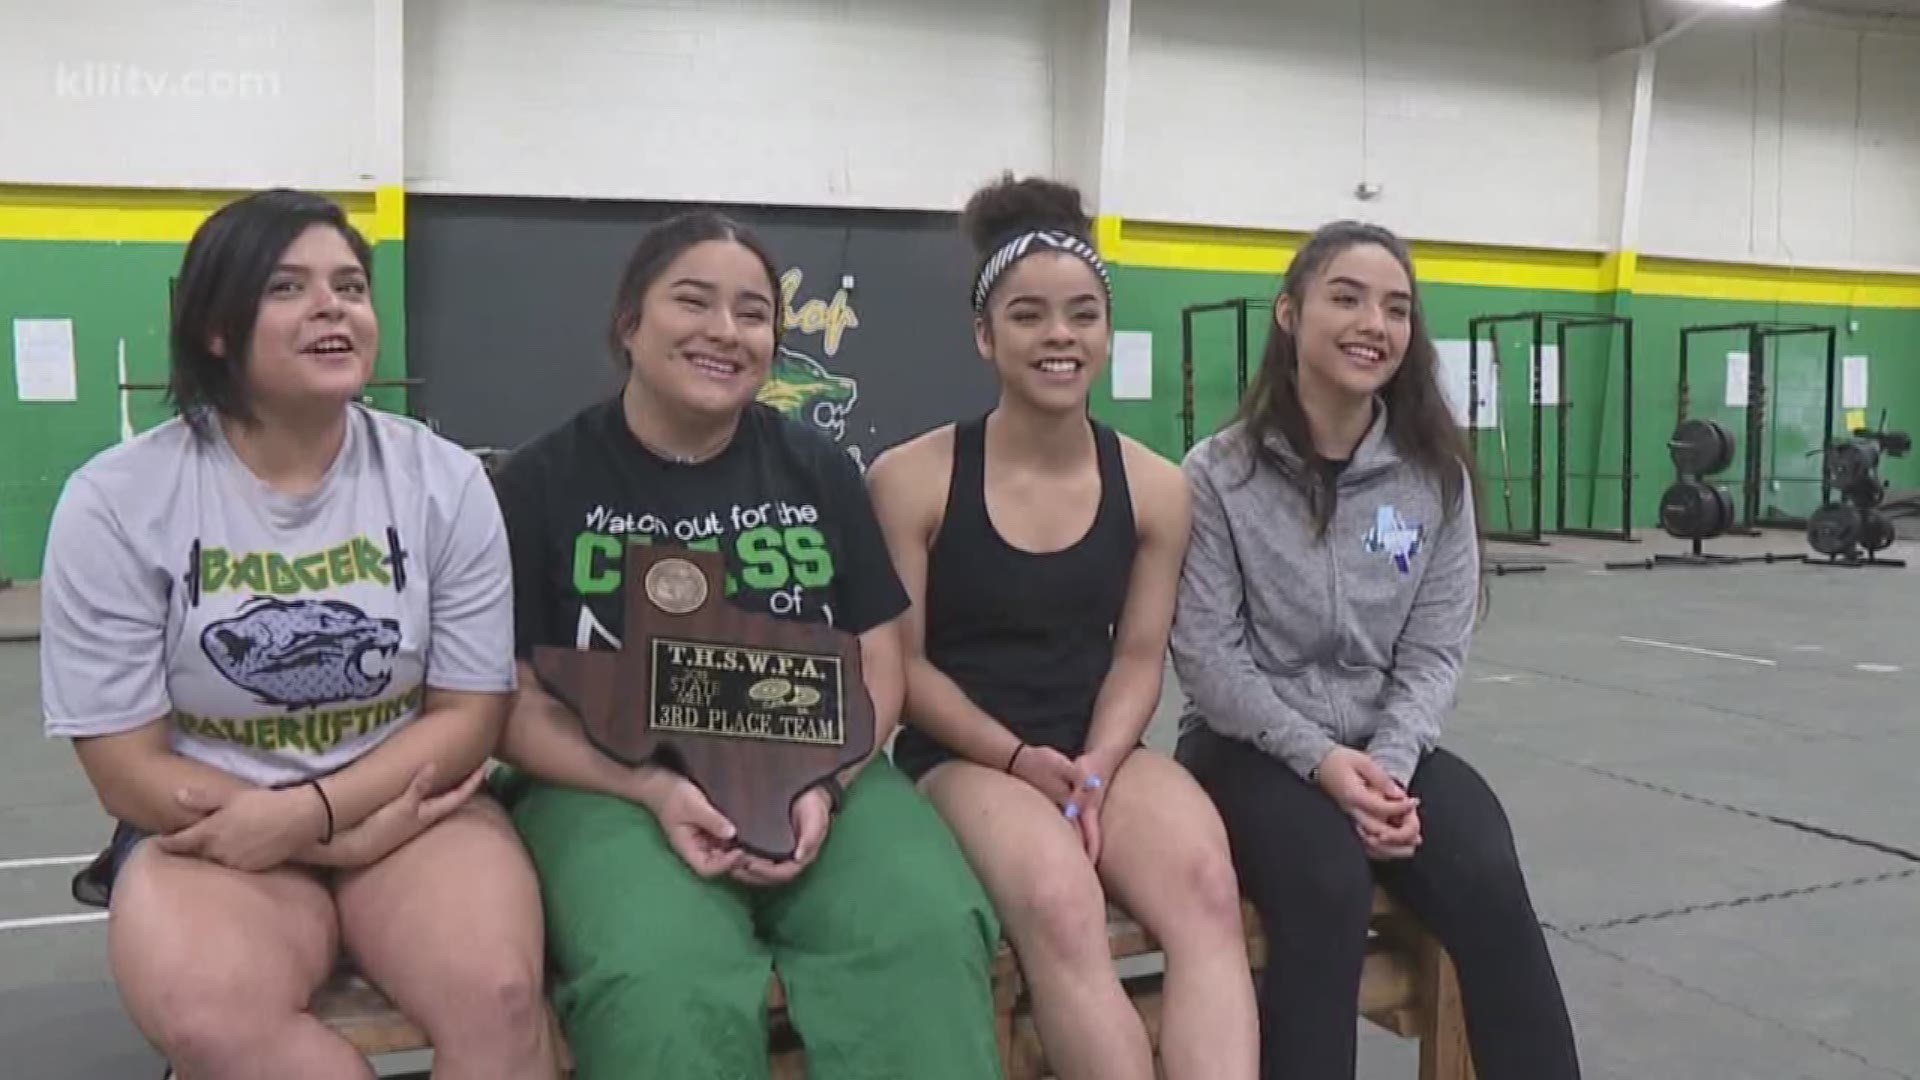 Four young ladies at Bishop High School are proving they have the muscle to compete in a sport that has traditionally been dominated by men.